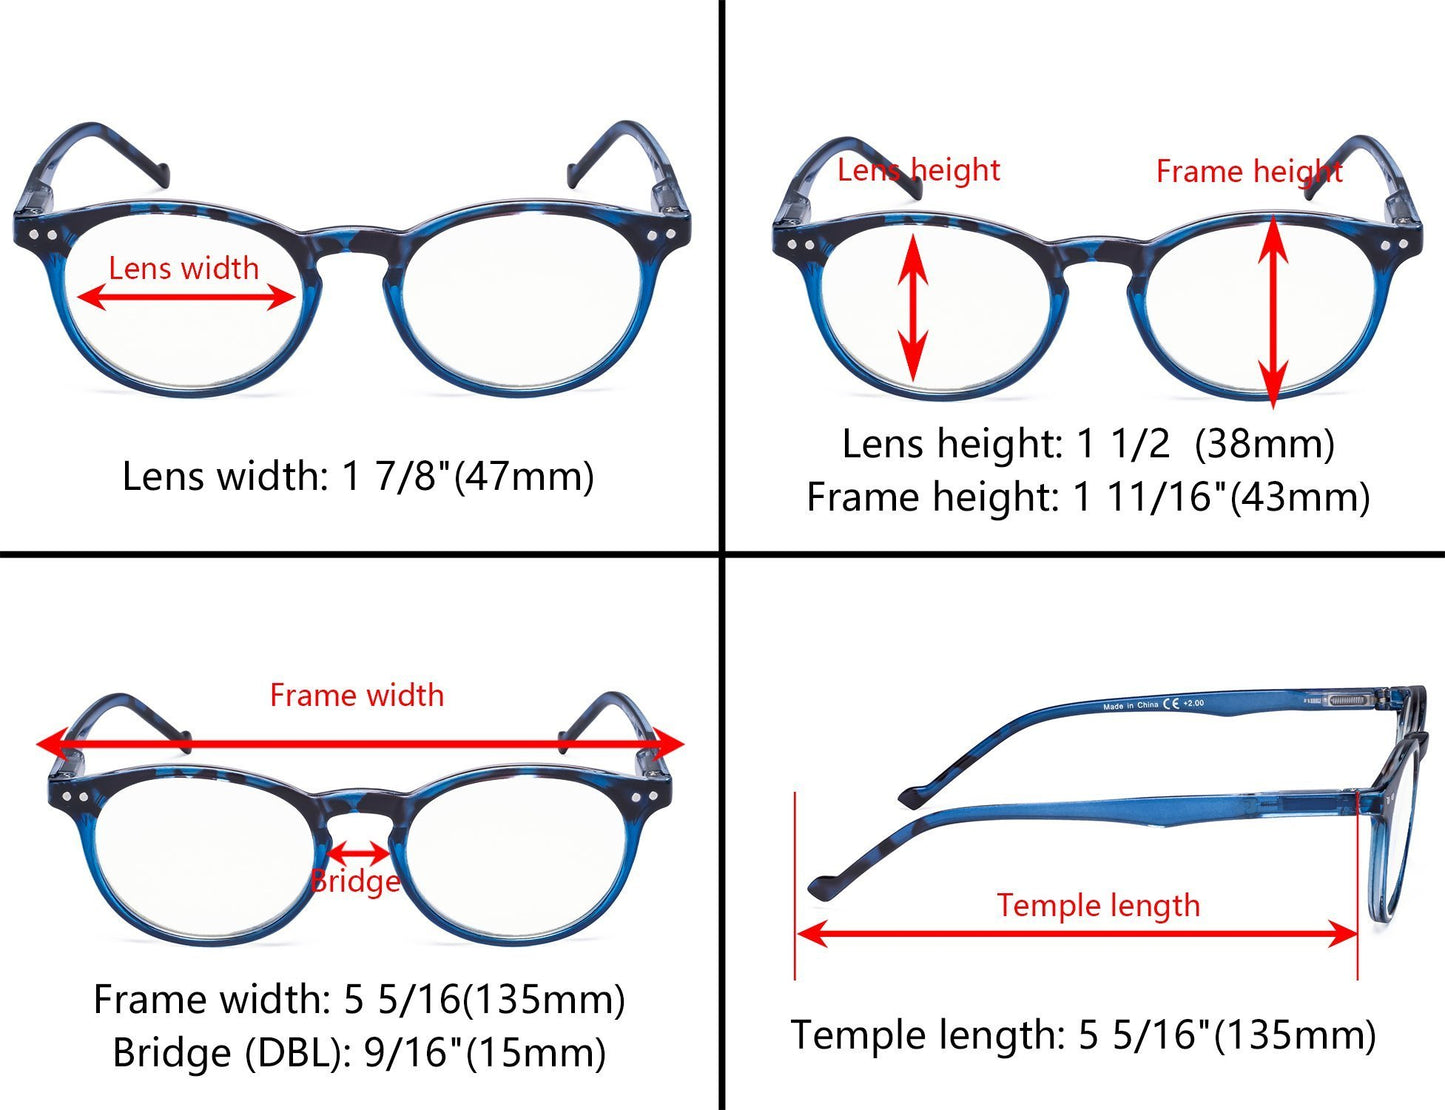 5 Pack Round Stylish Oval Reading Glasses for Women R071F